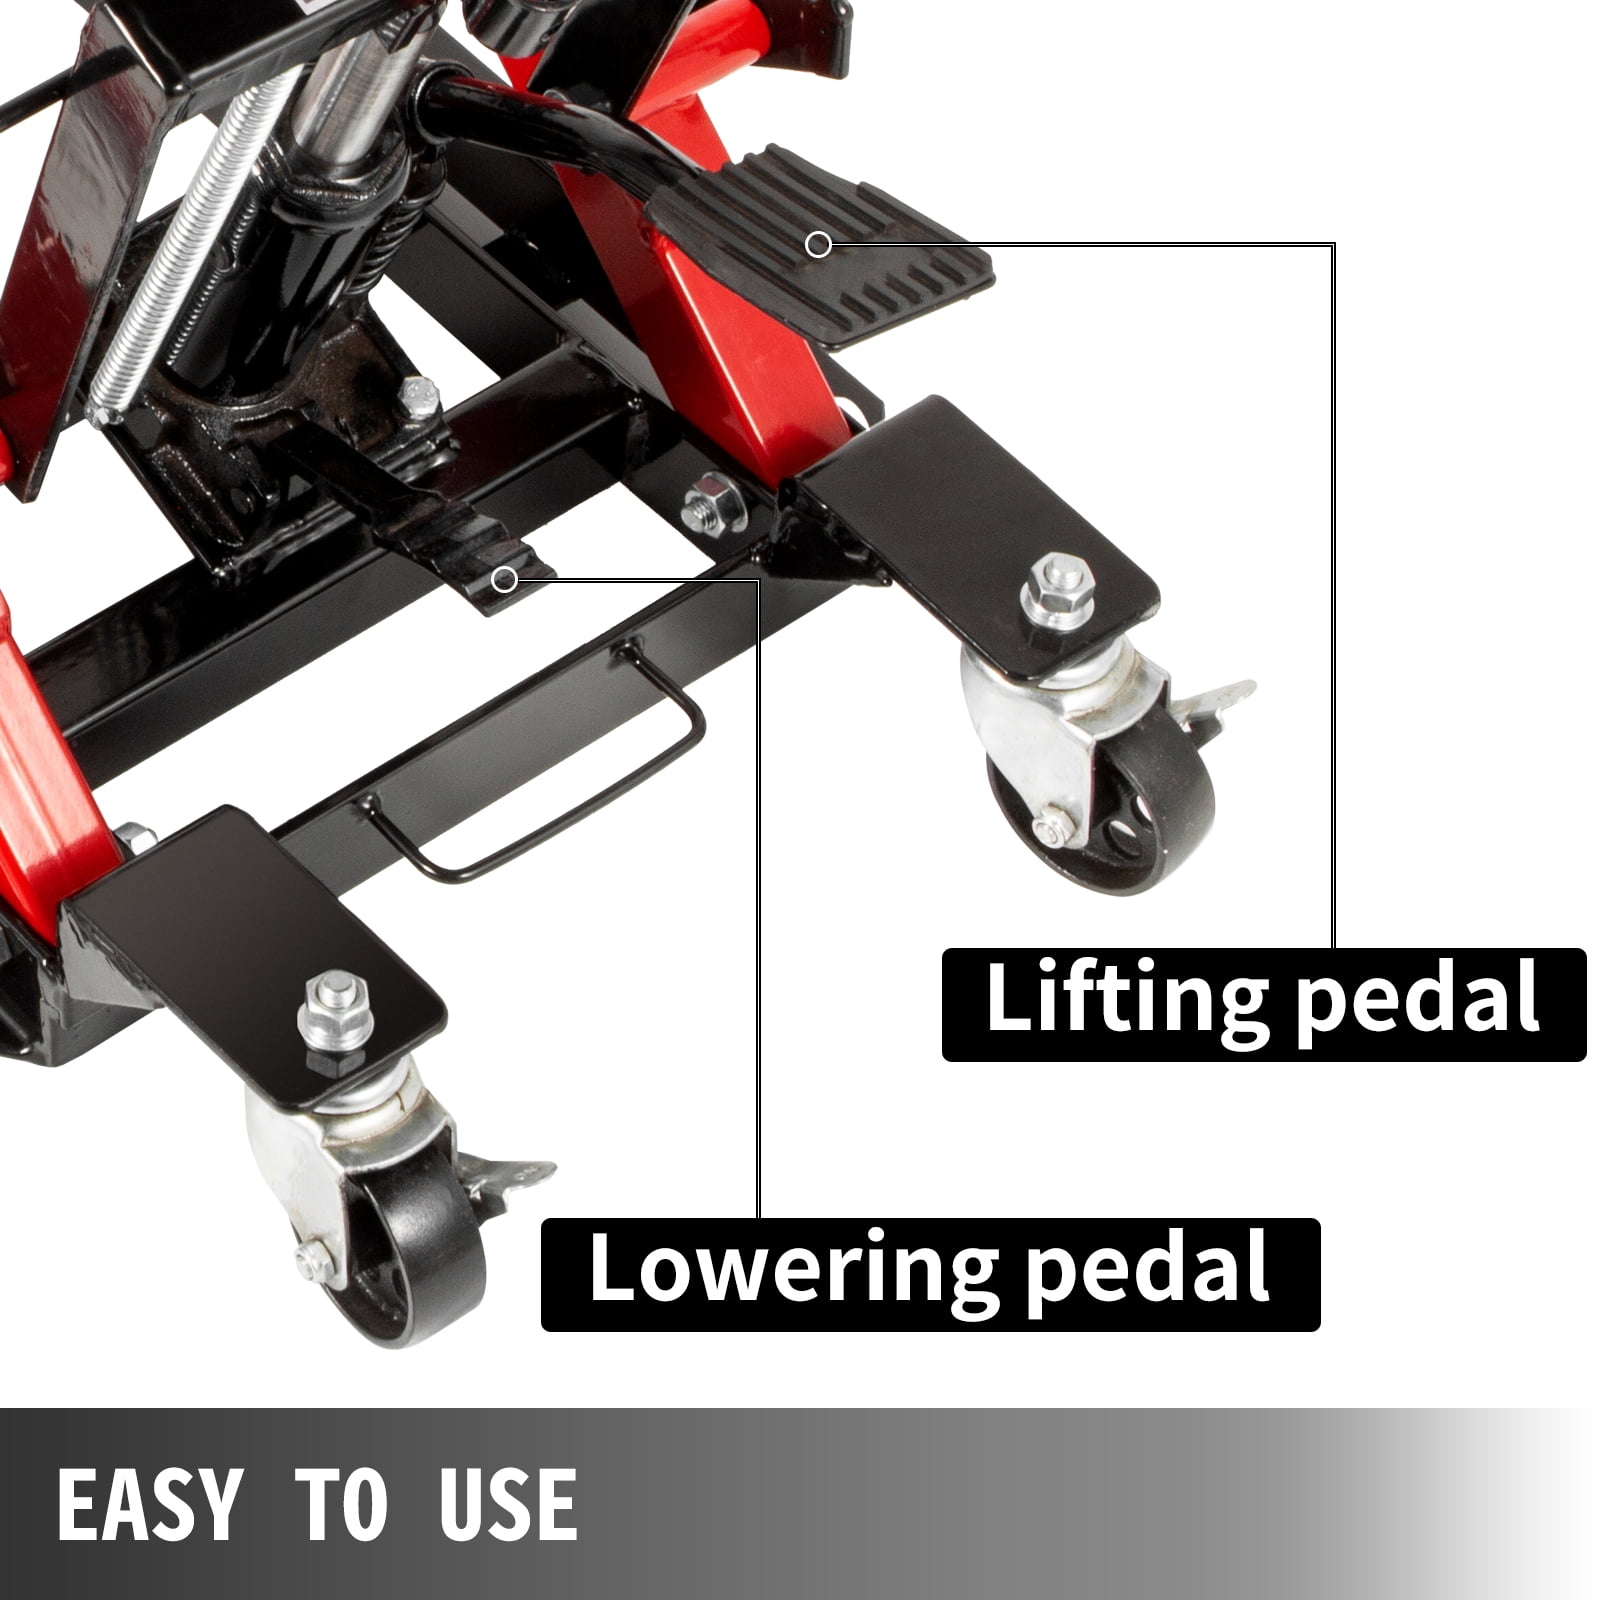 Hydraulic Motorcycle Scissor Jack with 1,700LBS Load Capacity Portable Motorcycle Lift Table VEVOR Motorcycle Jack Red Motorcycle Lift Stand Must-Have in Garage Adjustable Motorcycle Lift Jack 